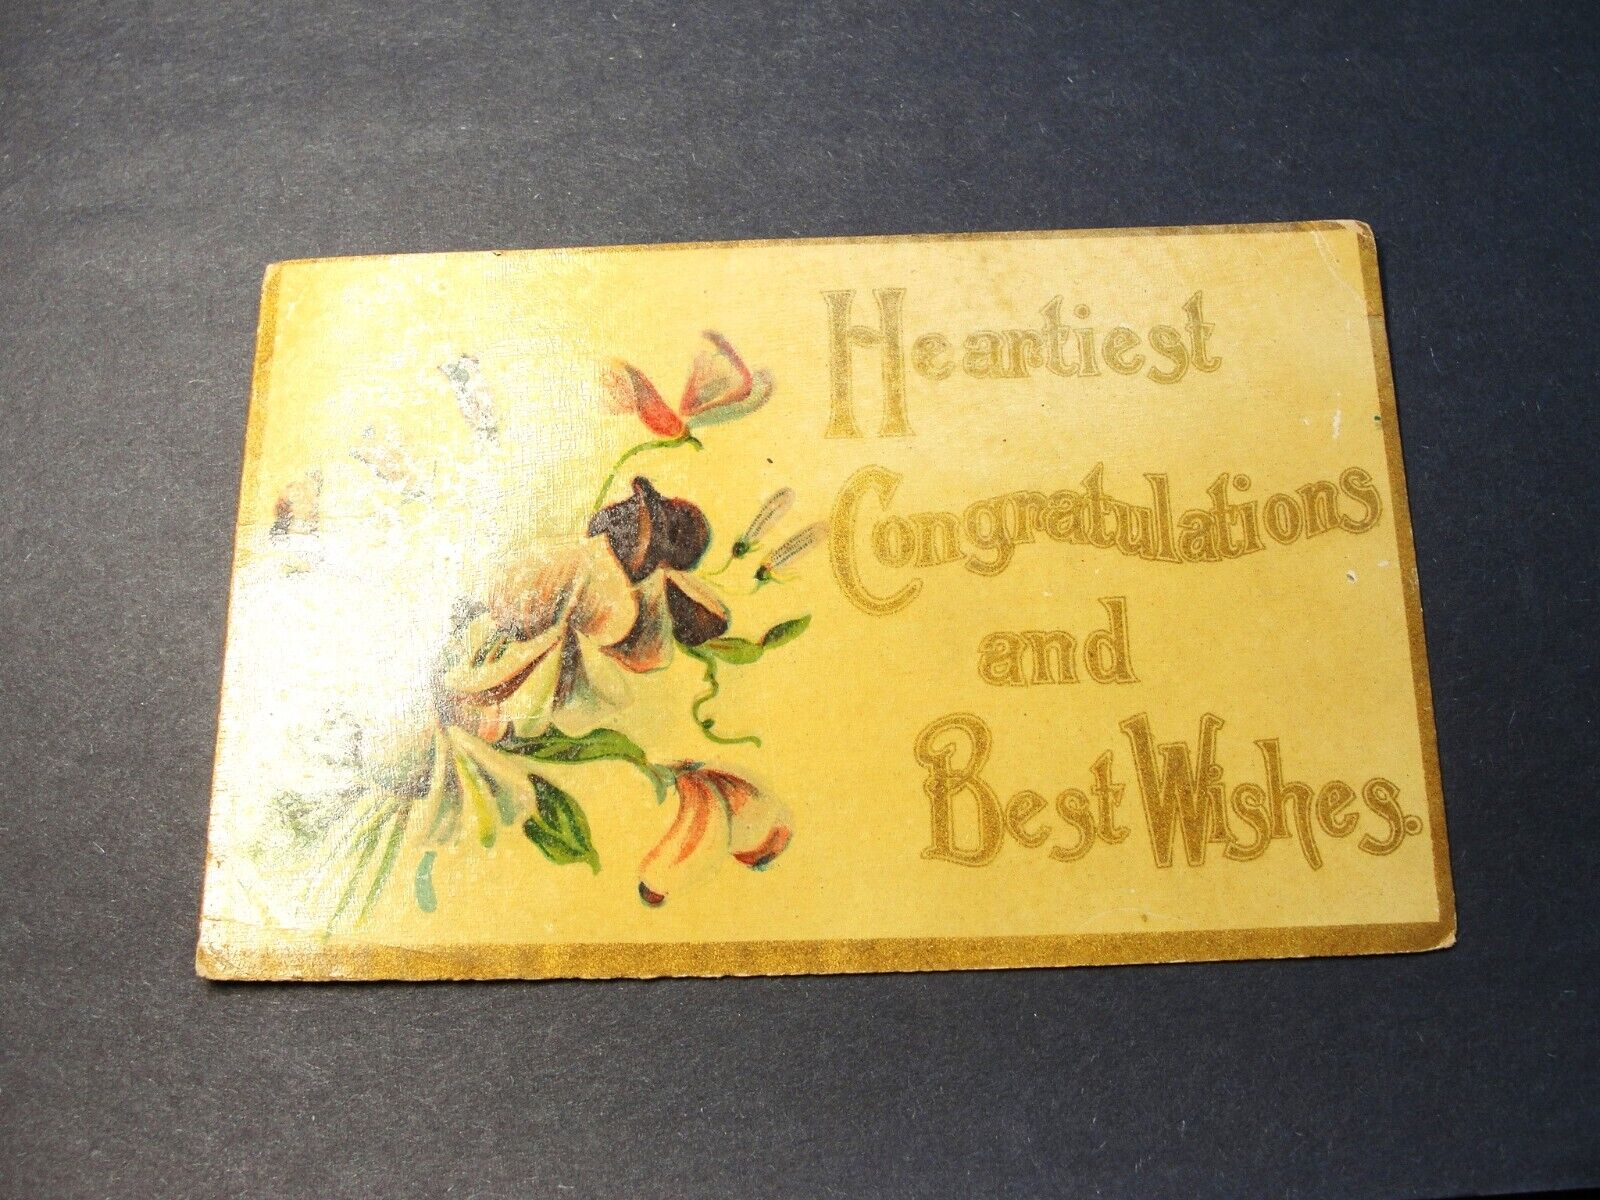 Heartiest Congratulations-Best Wishes -1909-13 Star Flag Cancellation -Postcard.